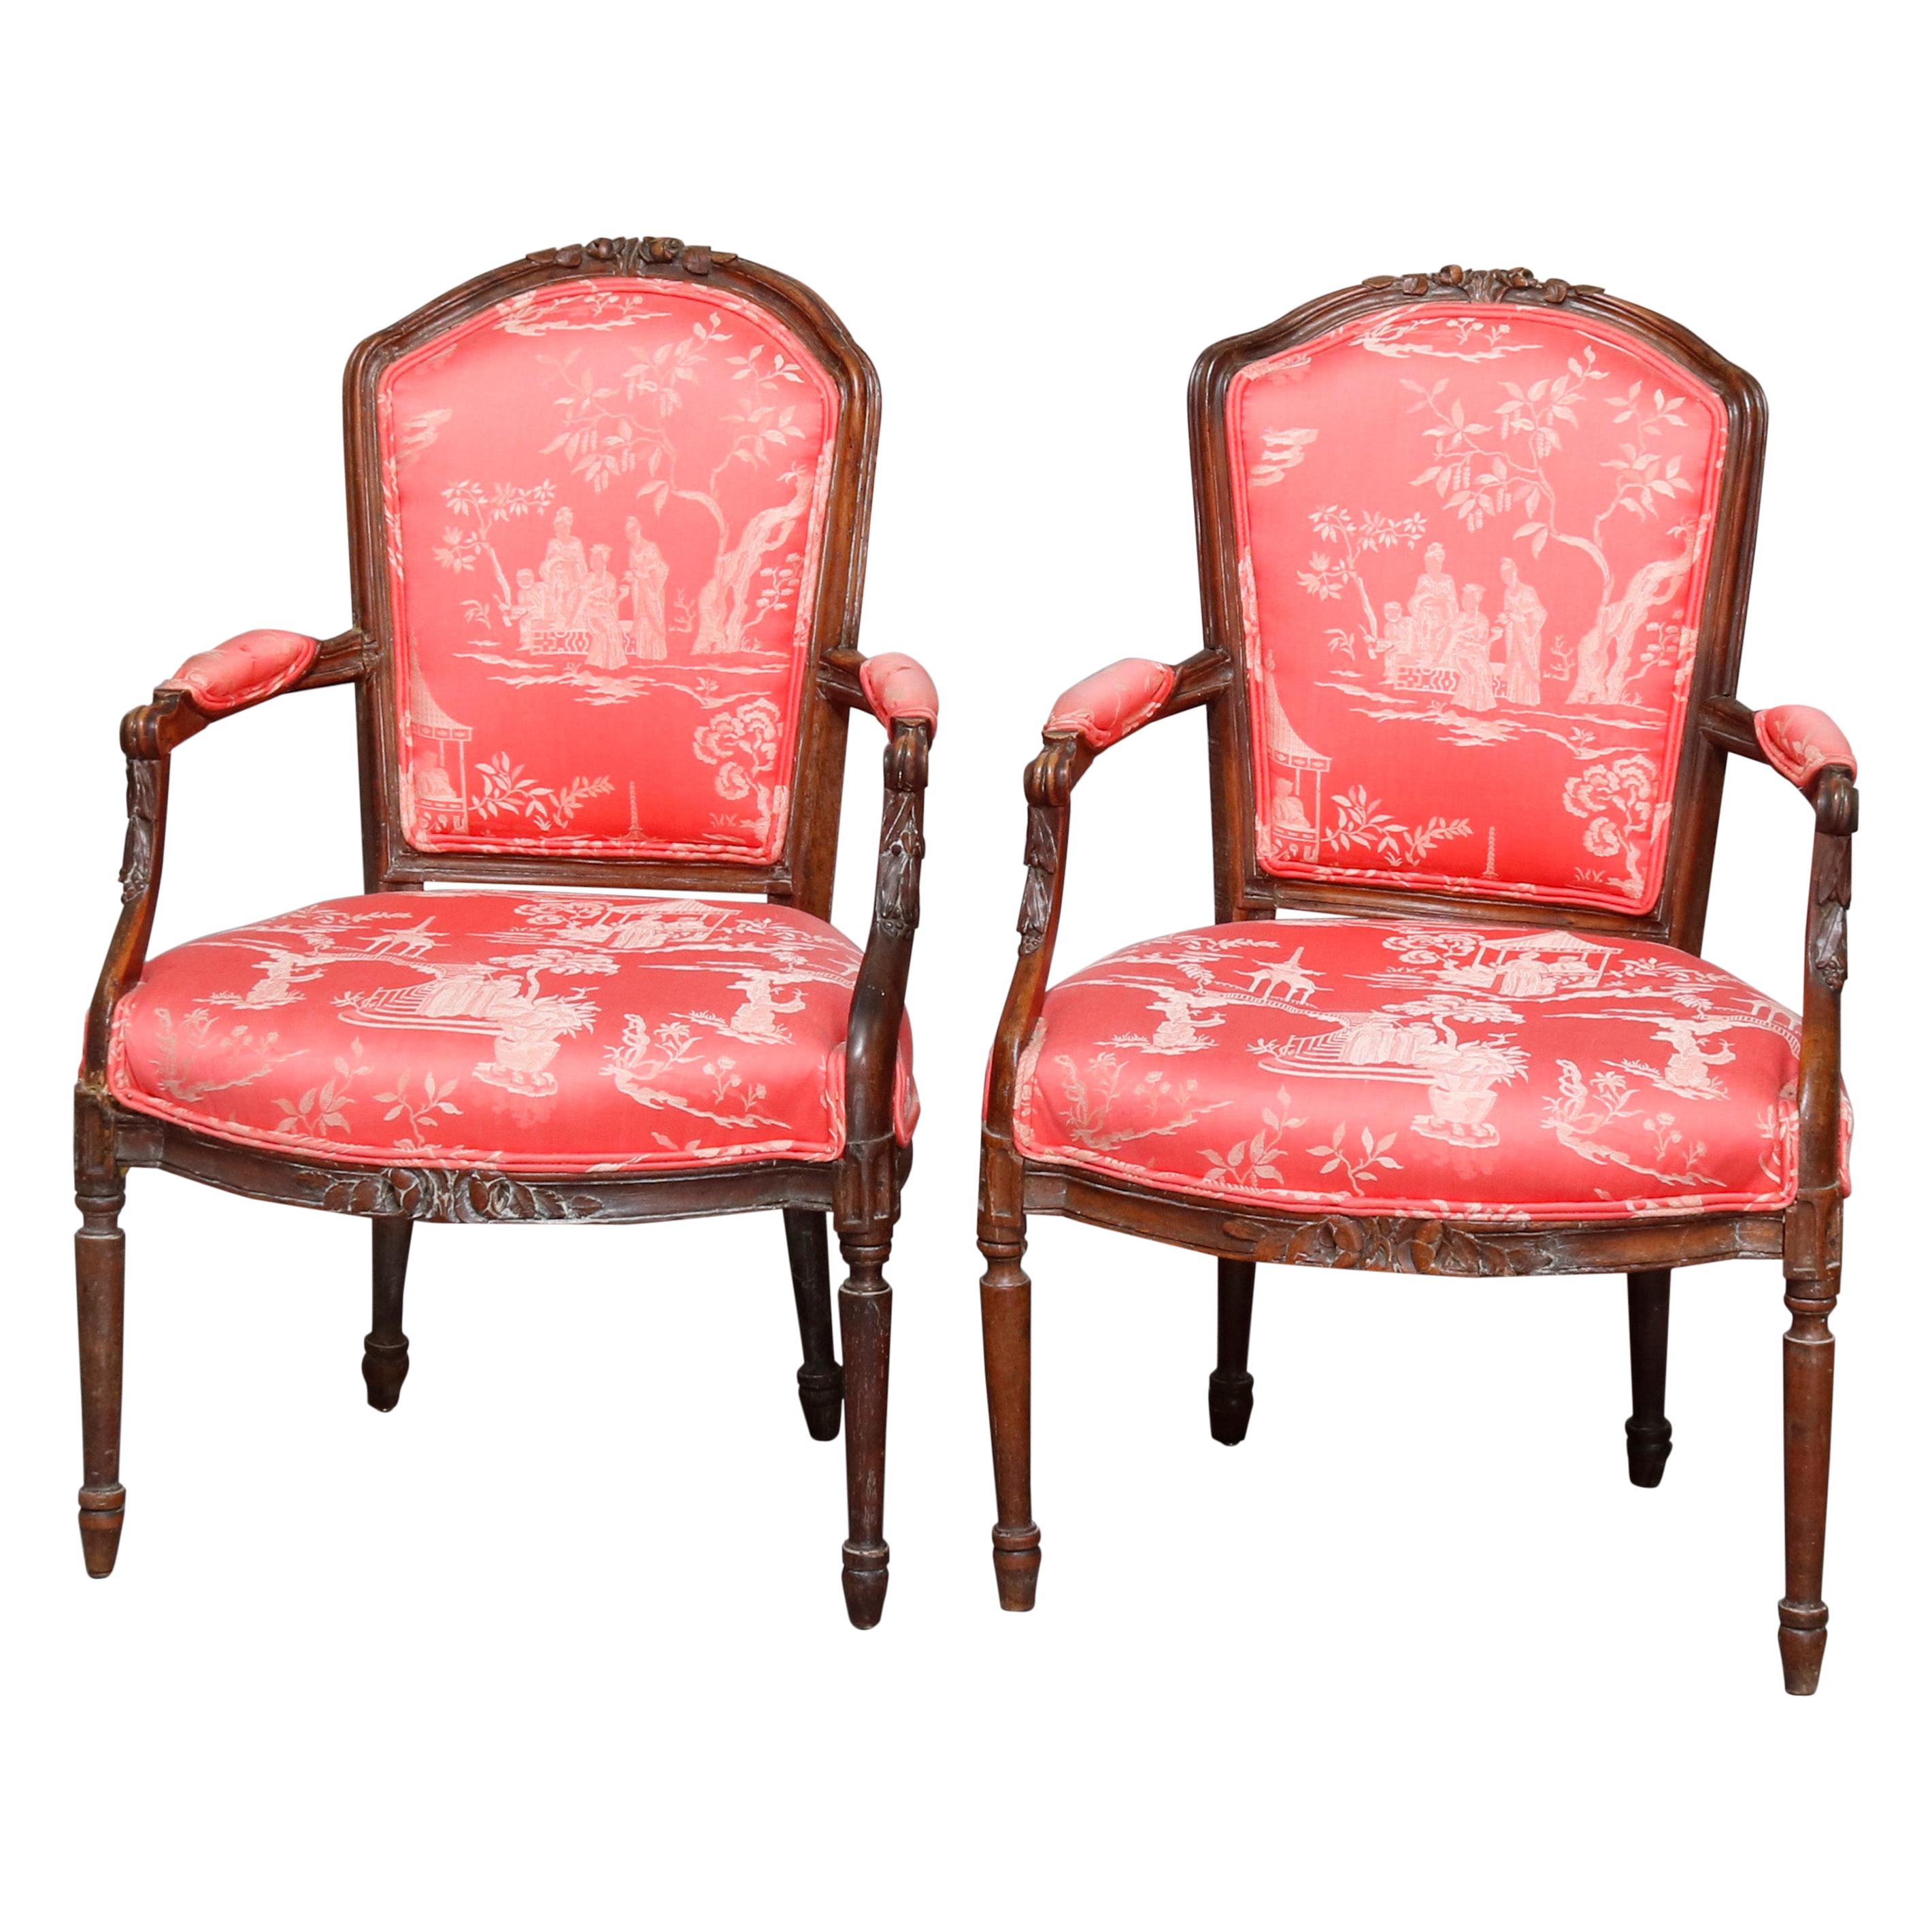 Pair of 18th Century French Louis XVI Carved Fruitwood and Upholstered Armchairs